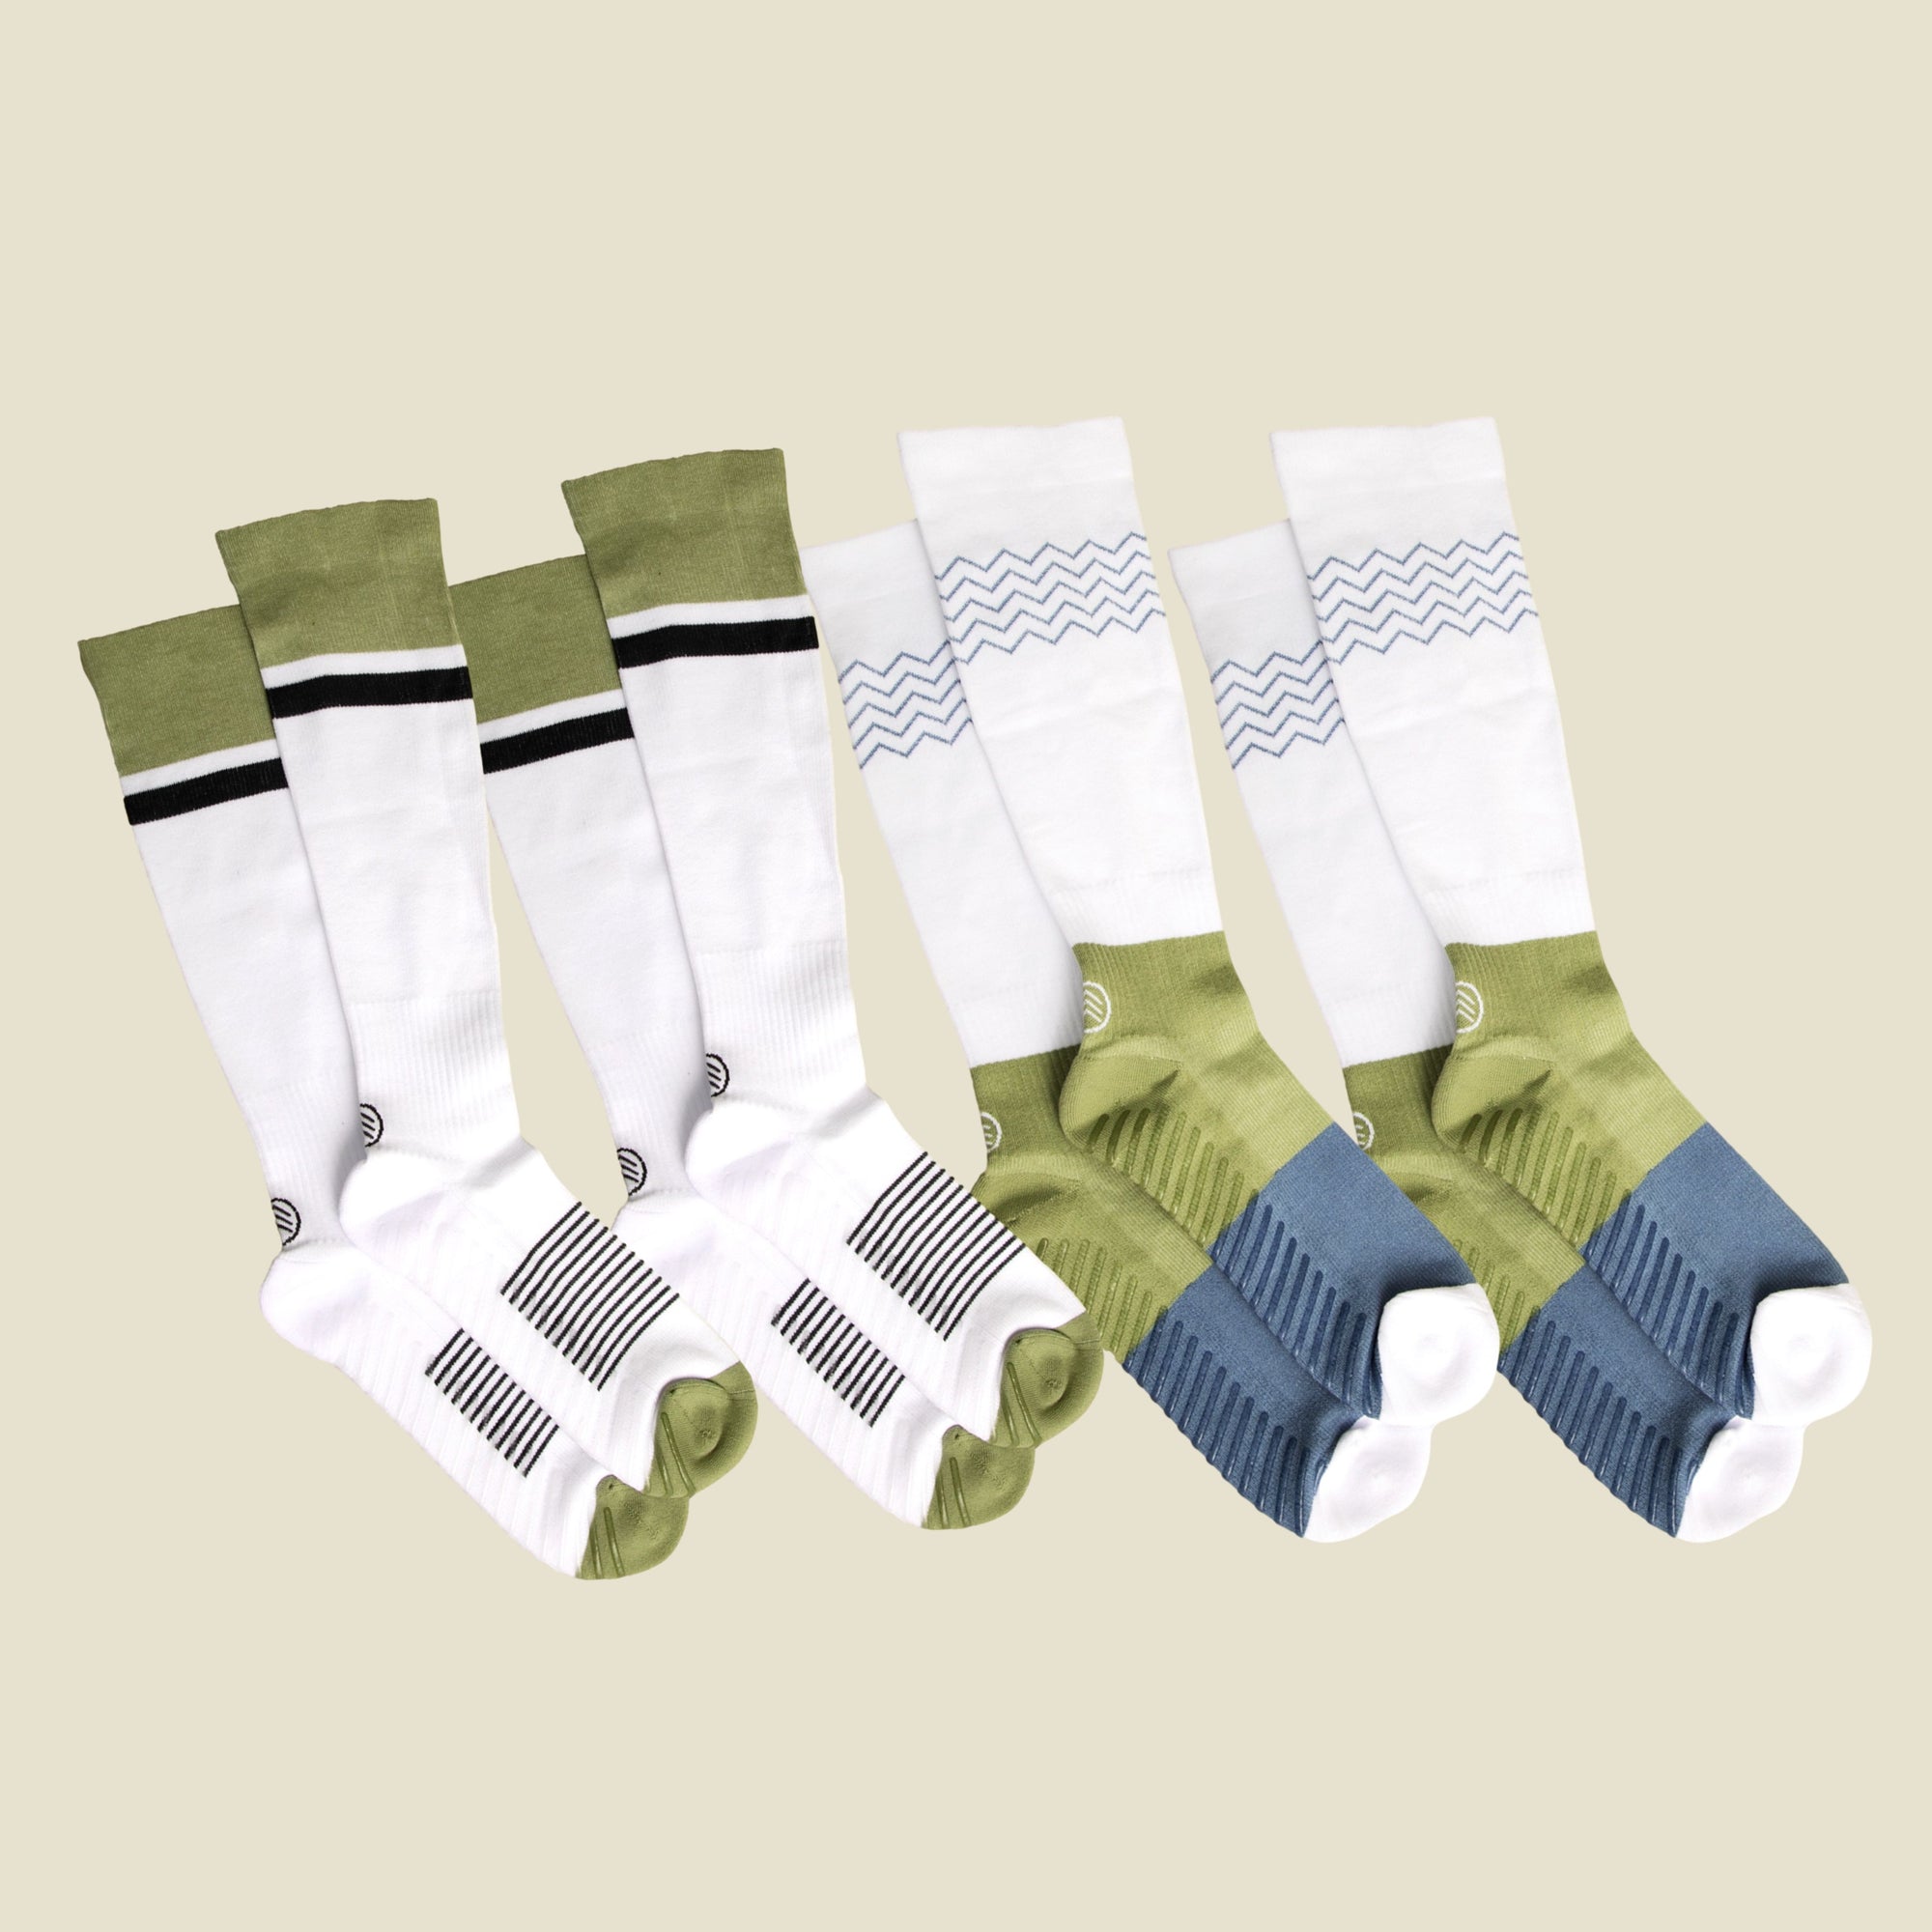 Women's White/Blue/Green Compression Socks with Grips Variety Pack - 4 Pairs - Gripjoy Socks